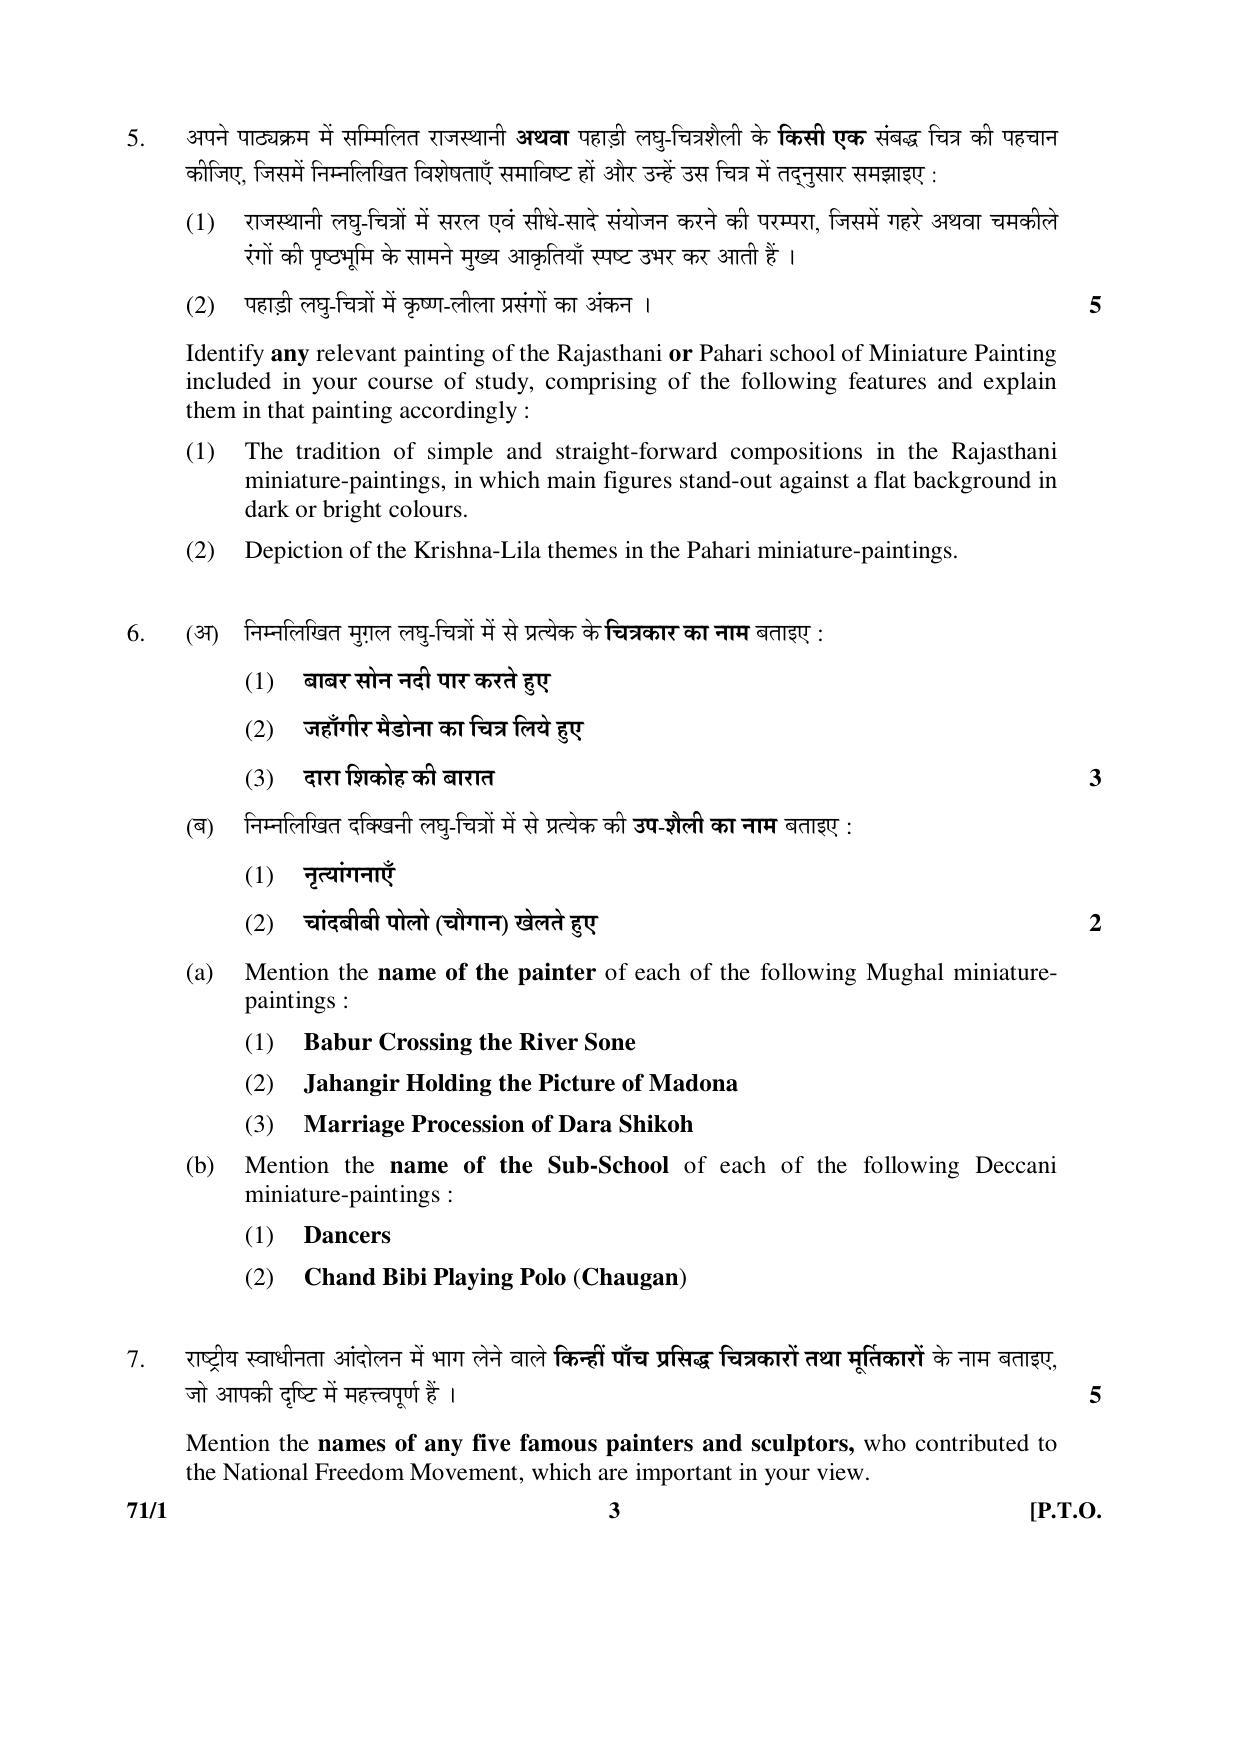 CBSE Class 12 71-1 PAINTING (Theory) 2016 Question Paper - Page 3